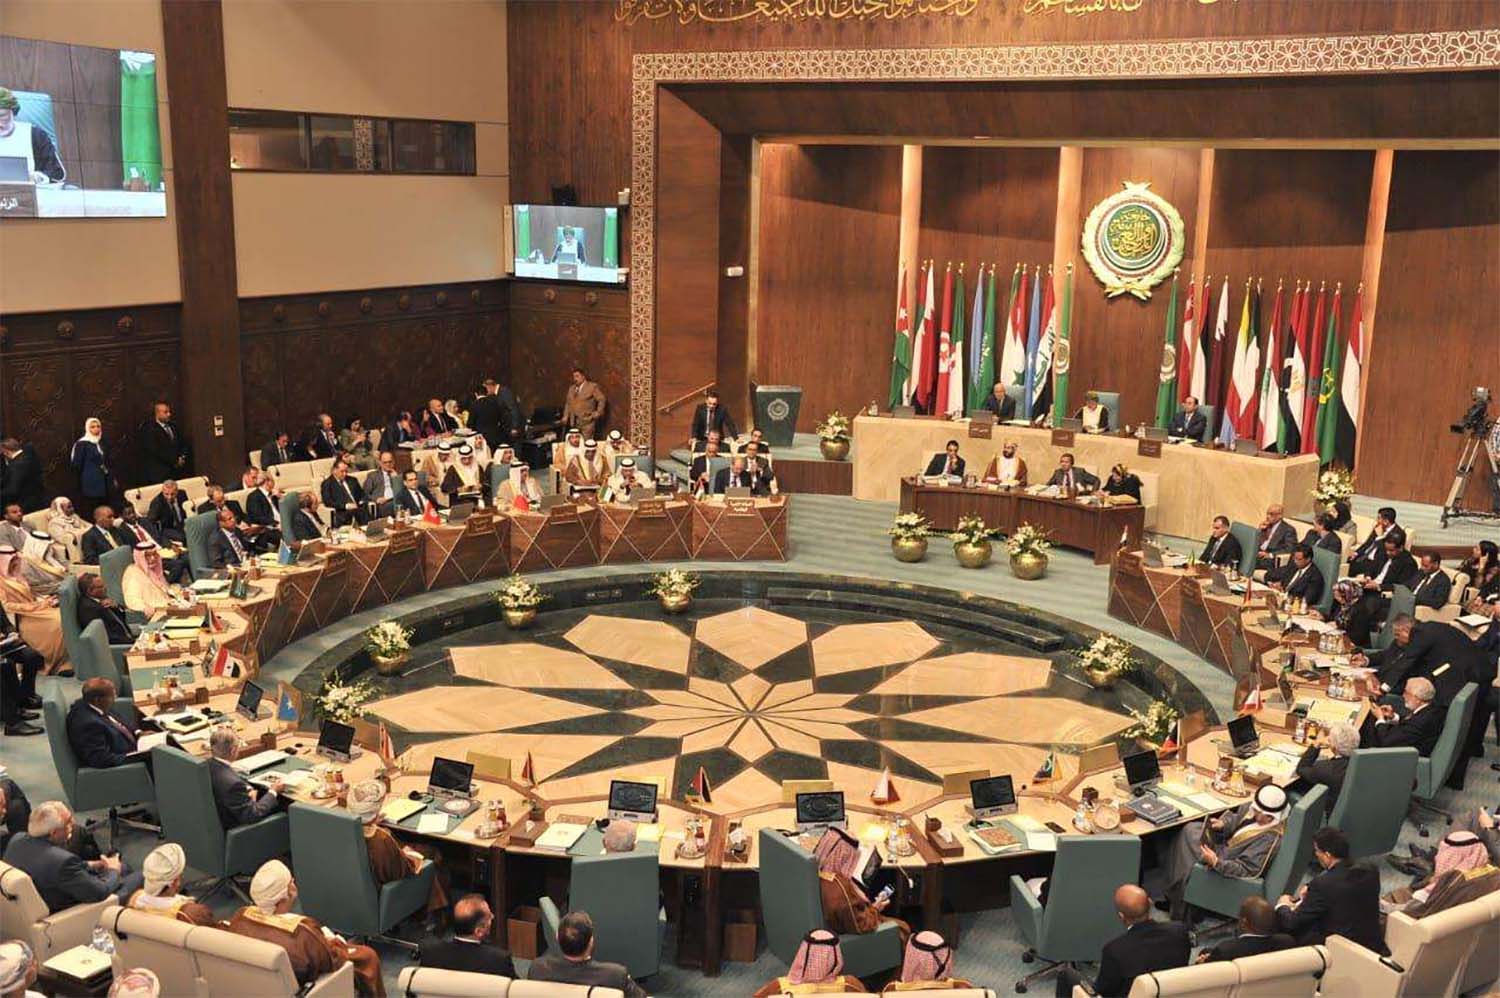 Arab Foreign Ministers attend their annual meeting at the Arab League headquarters in Cairo